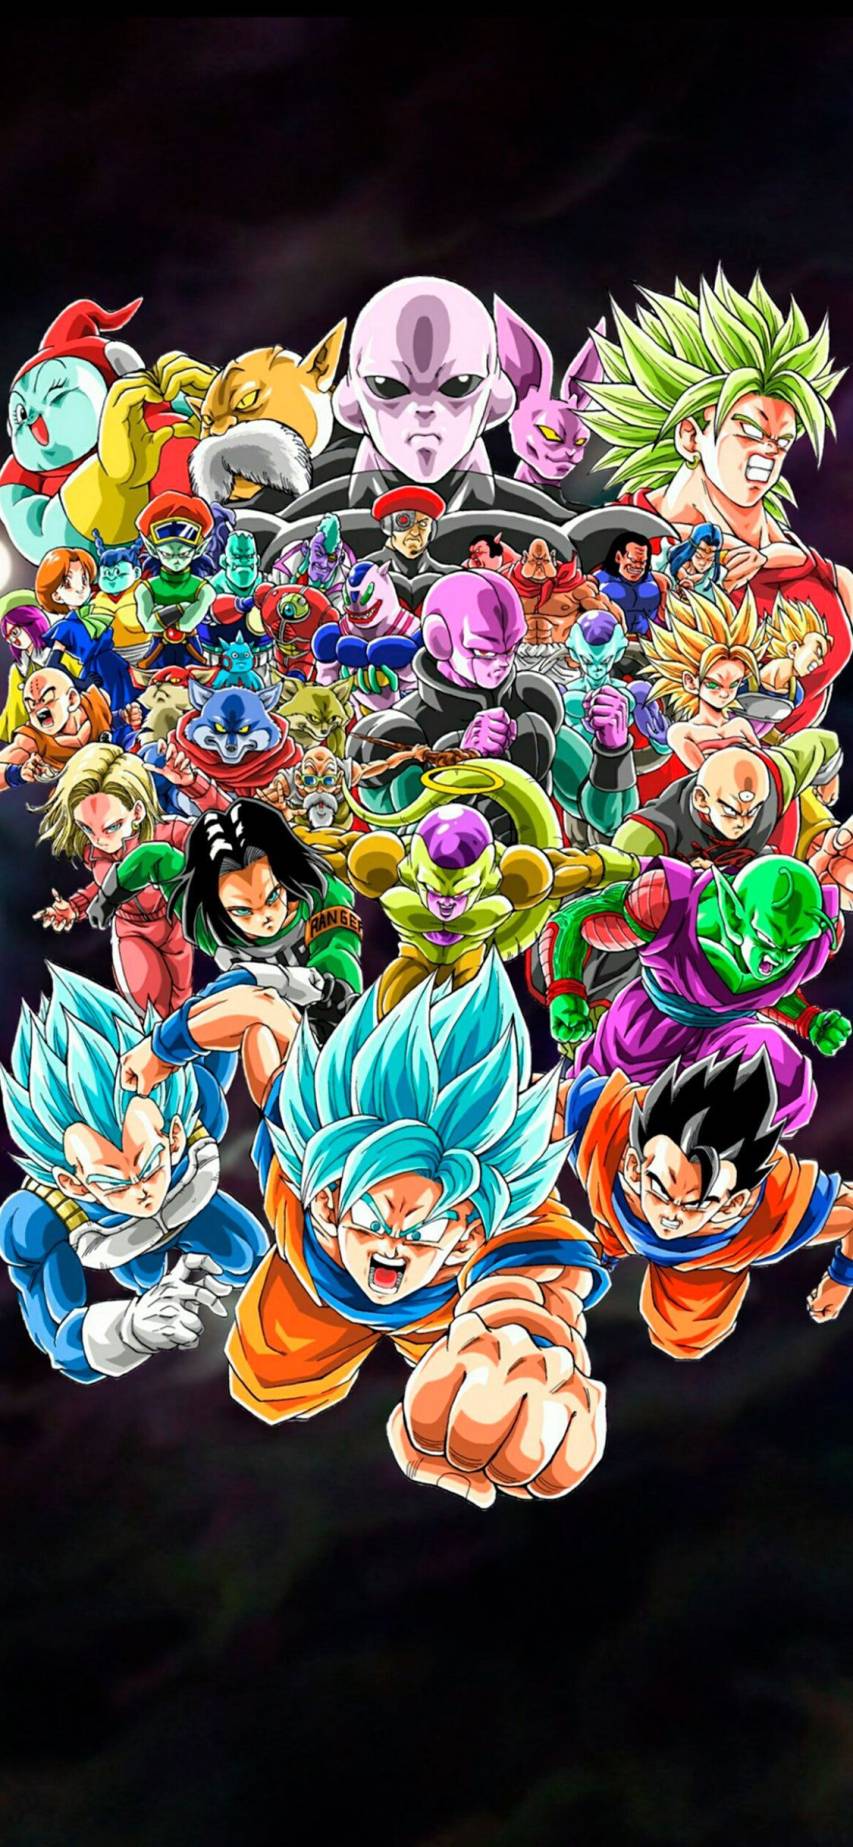 Dragon Ball Z IPhone Wallpaper and Background image Free Download